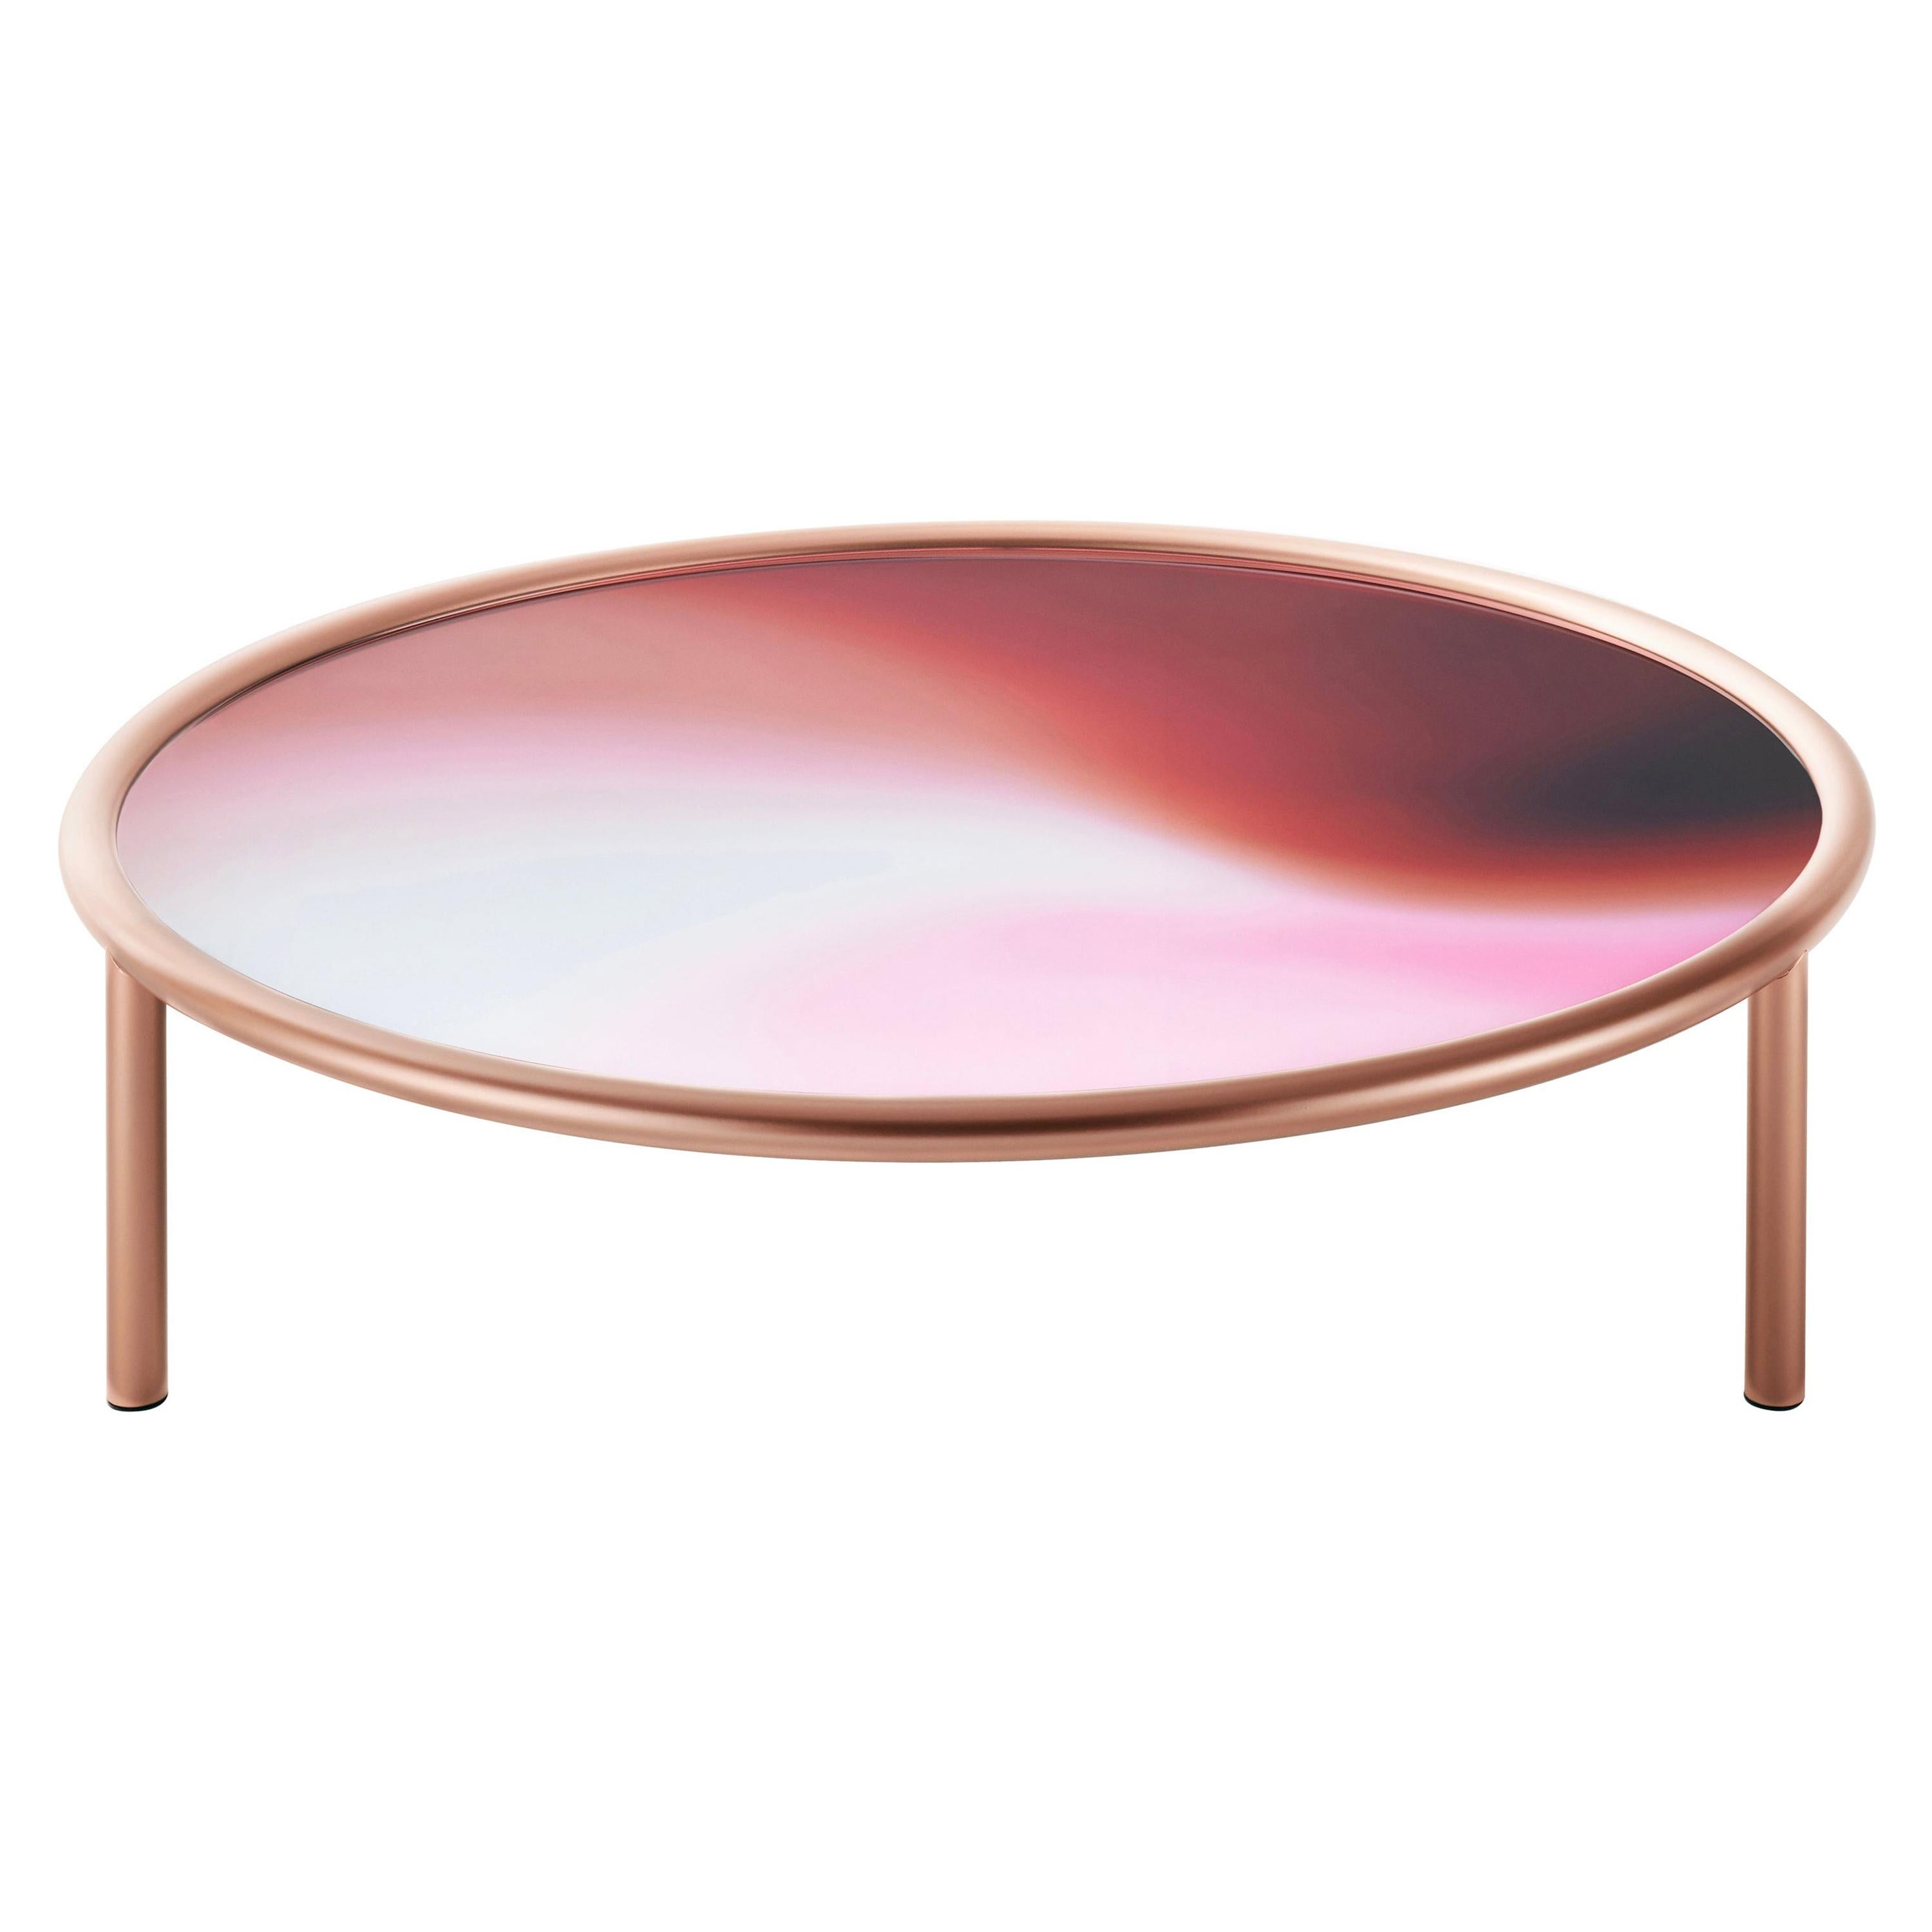 Moroso - Patricia Urquiola Cappellini Cocktail Table with Steel Base